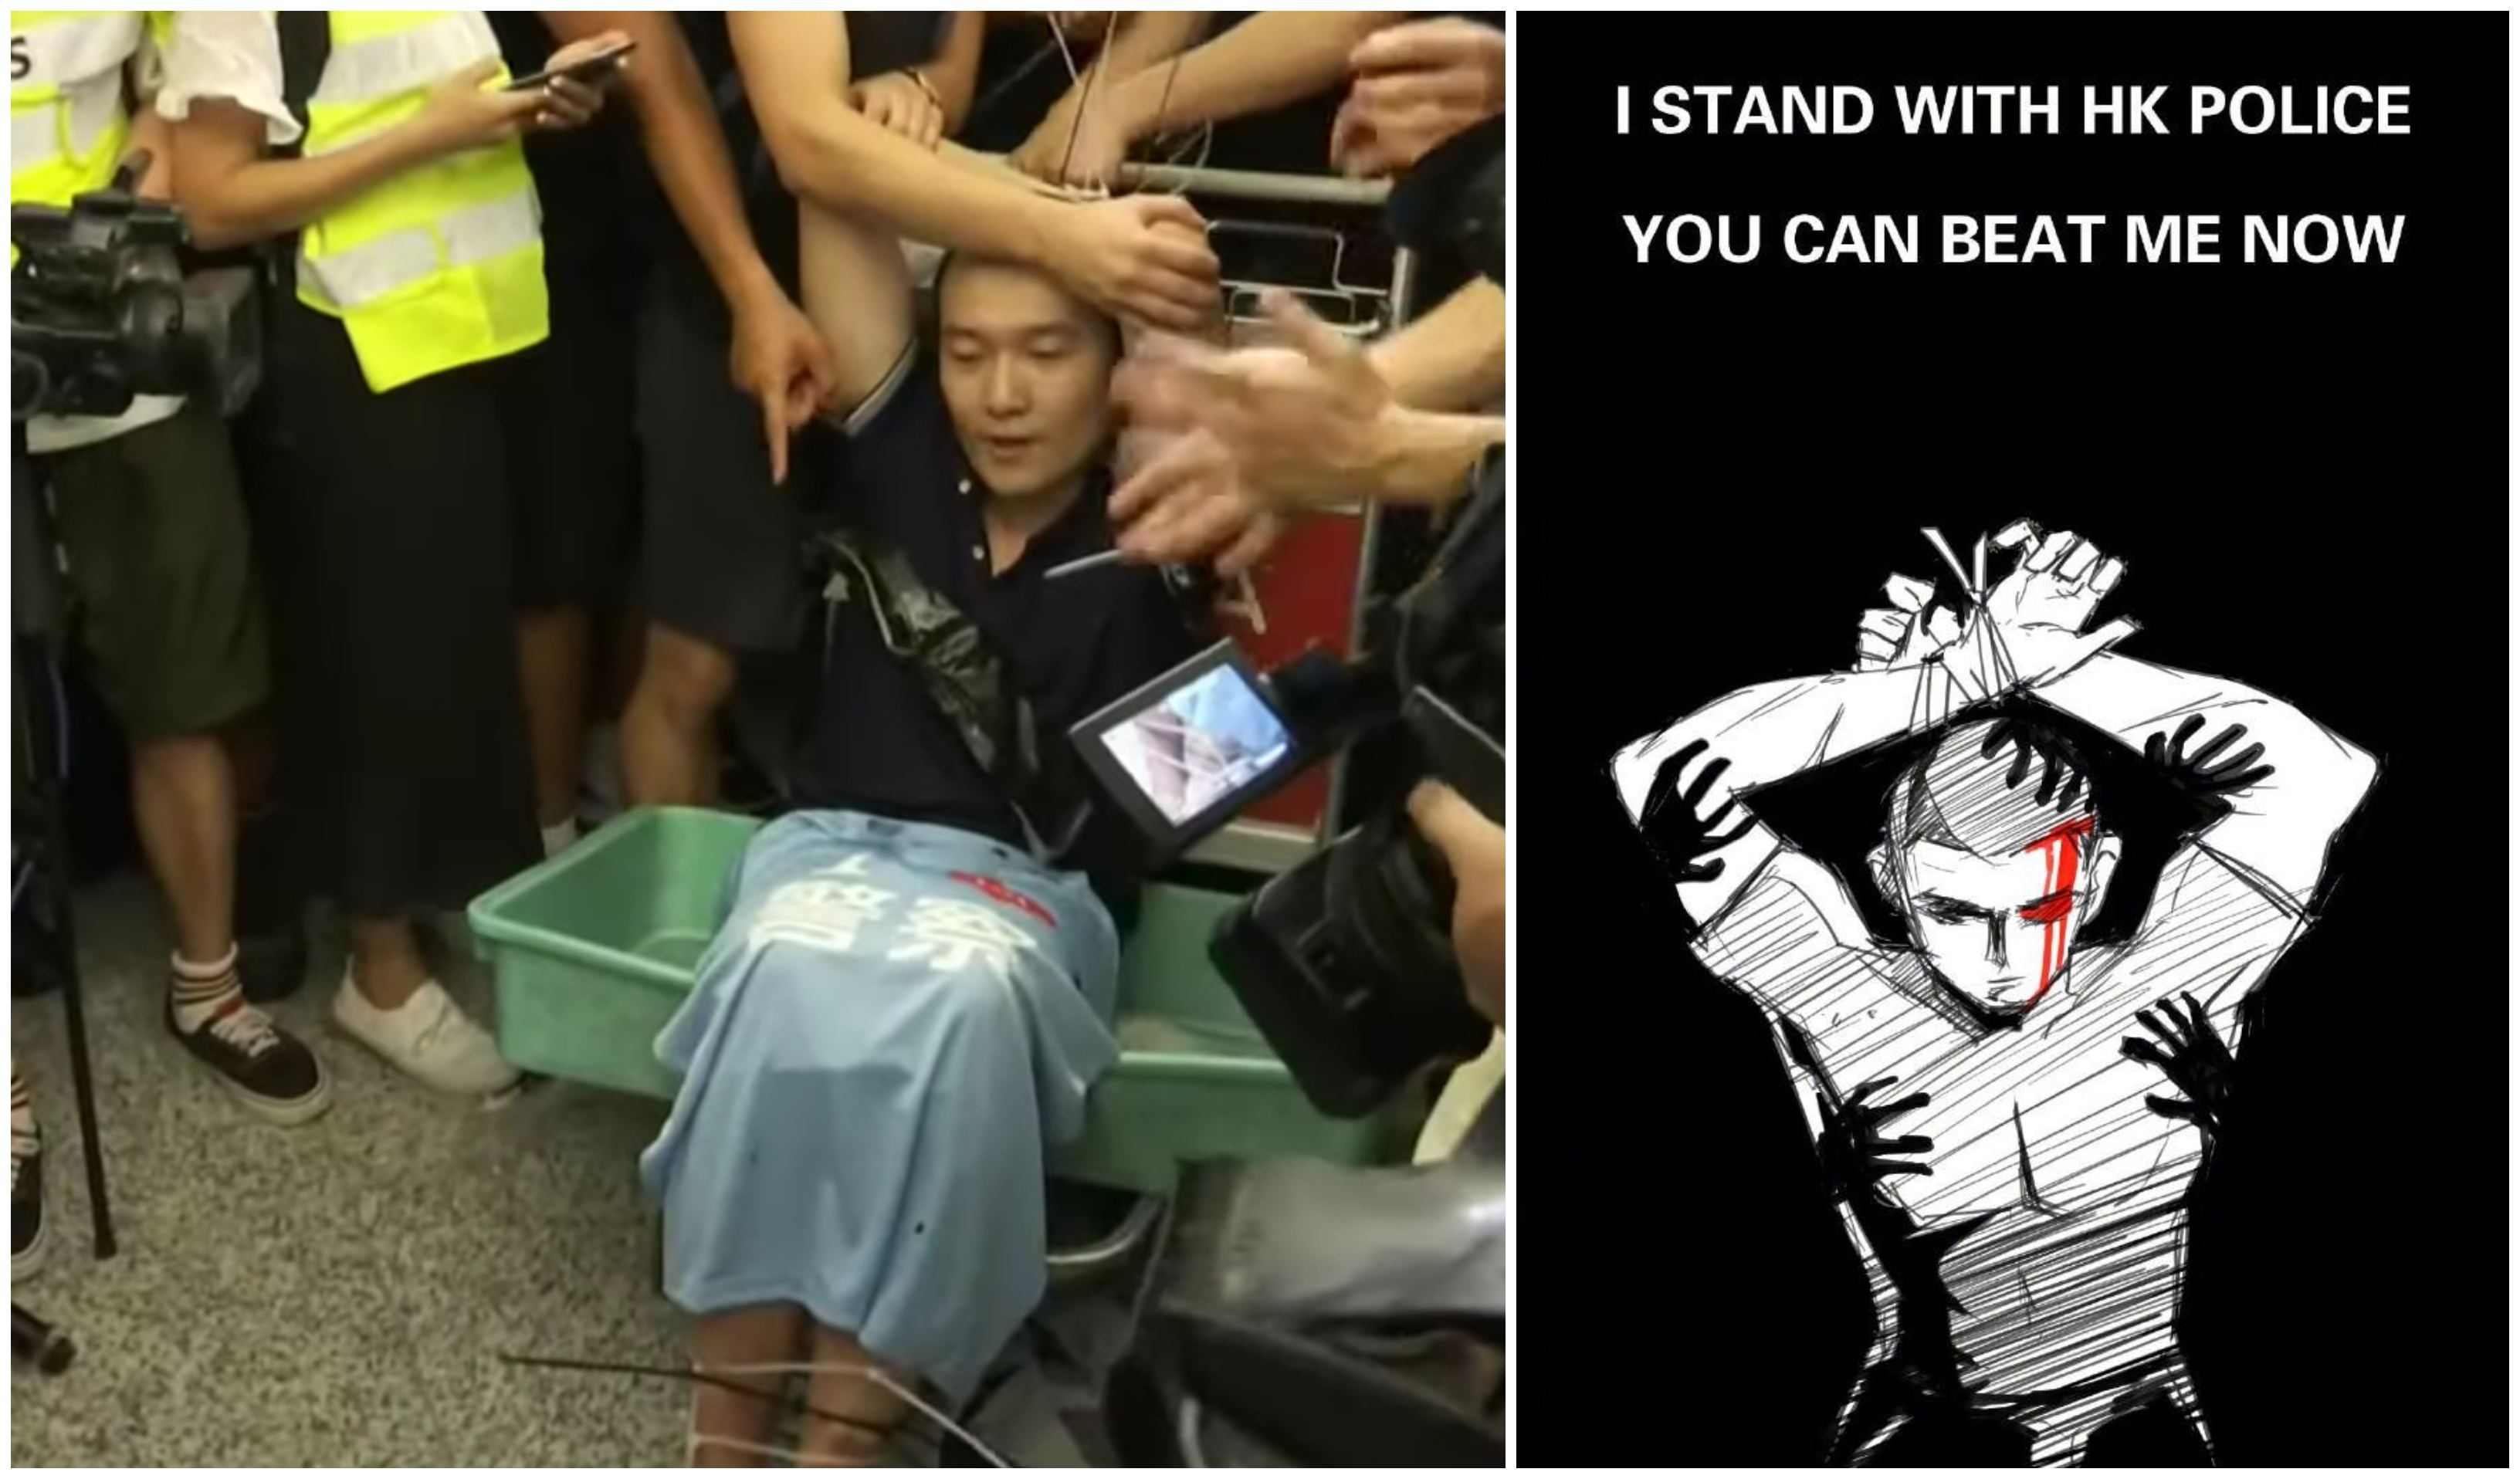 Global Times staffer Fu Guohao, who was detained by protesters at Hong Kong International Airport on Tuesday night (left), has since been lionized in memes by mainland social media users (right). Screengrabs via YouTube/Twitter.